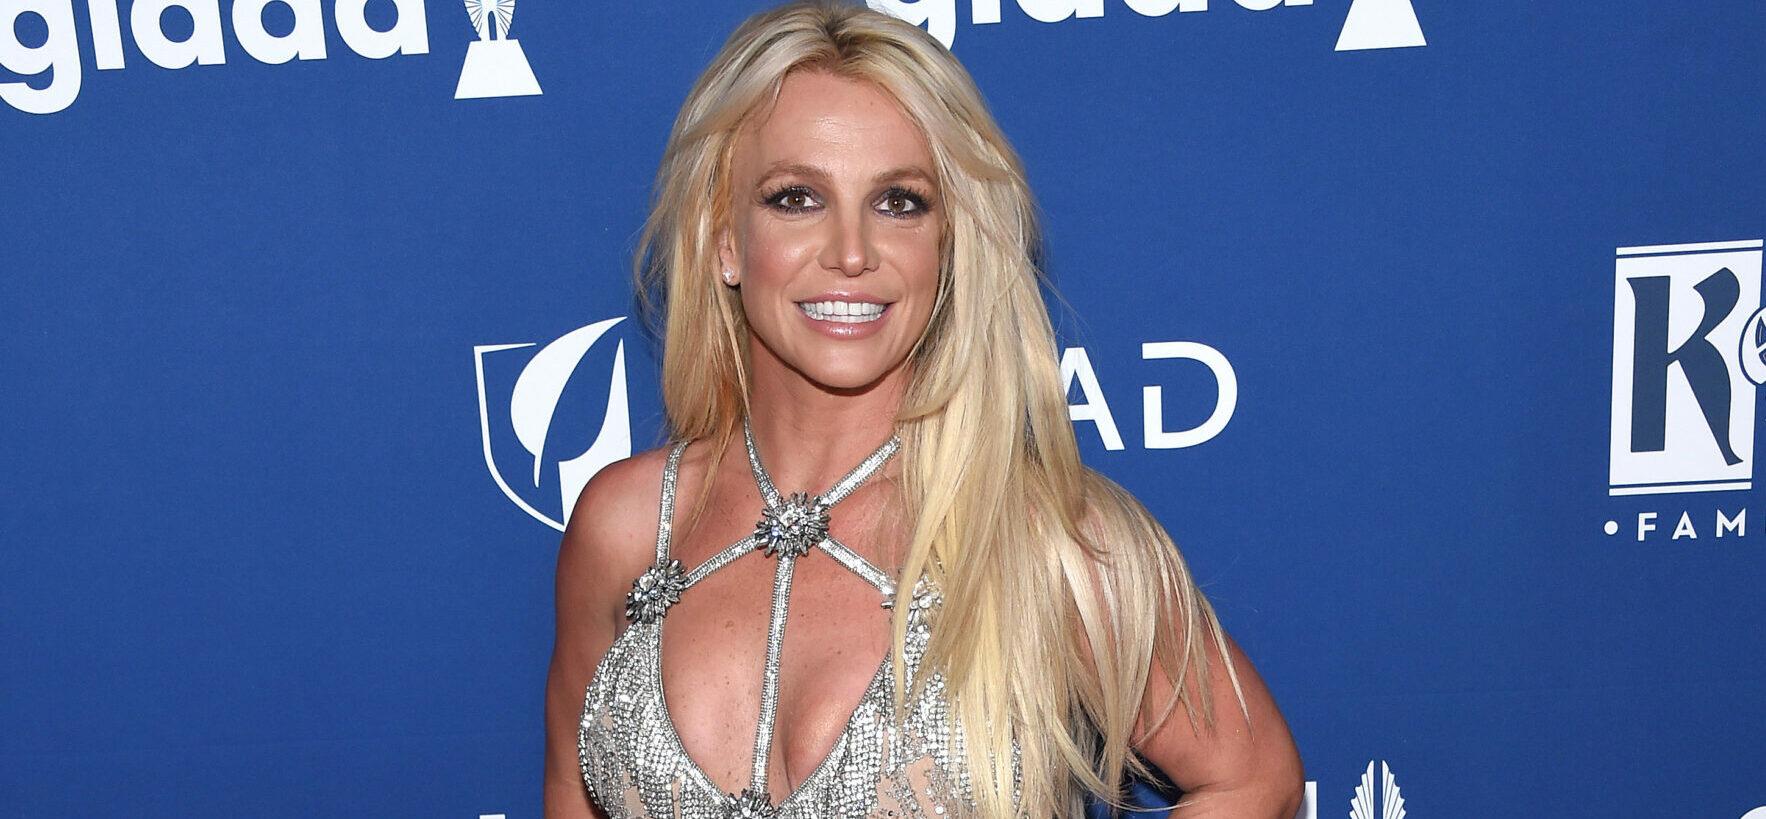 Britney Spears Shares Video Of Naked Beach Trip ‘no Paps Here